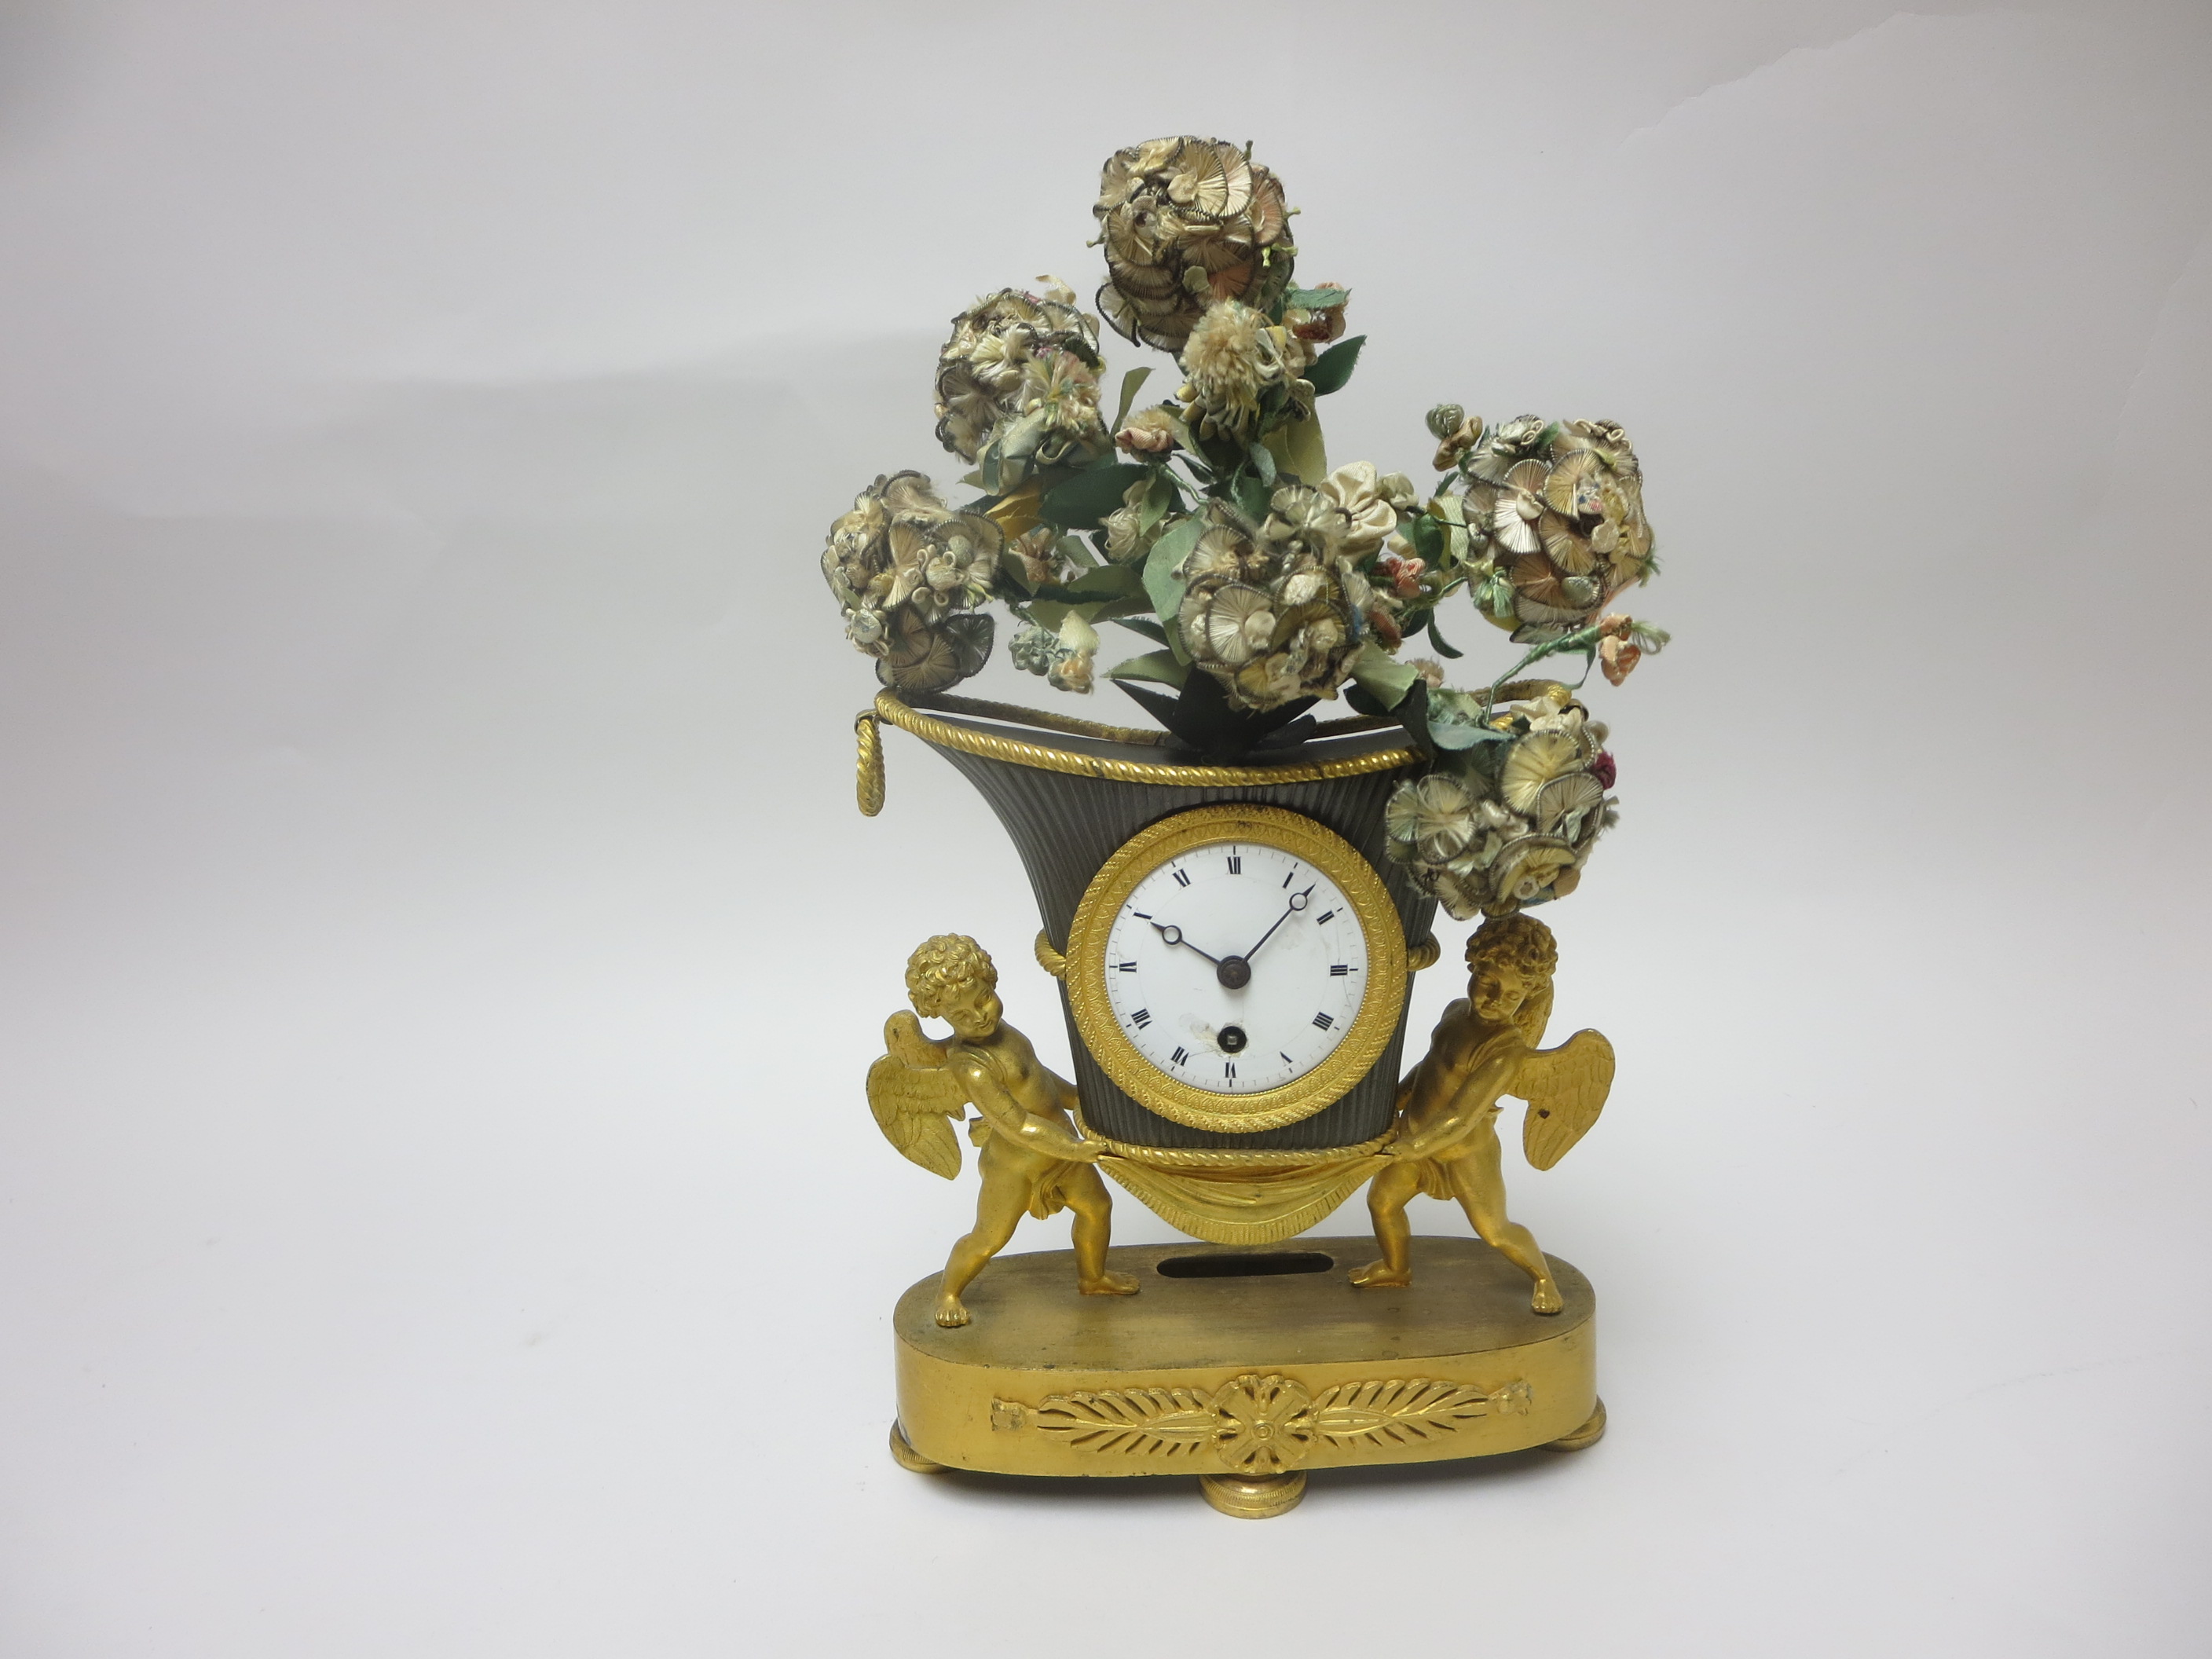 A 19th Century French Mantel Clock with white enamel dial in vase shape surround supported by two - Image 2 of 3